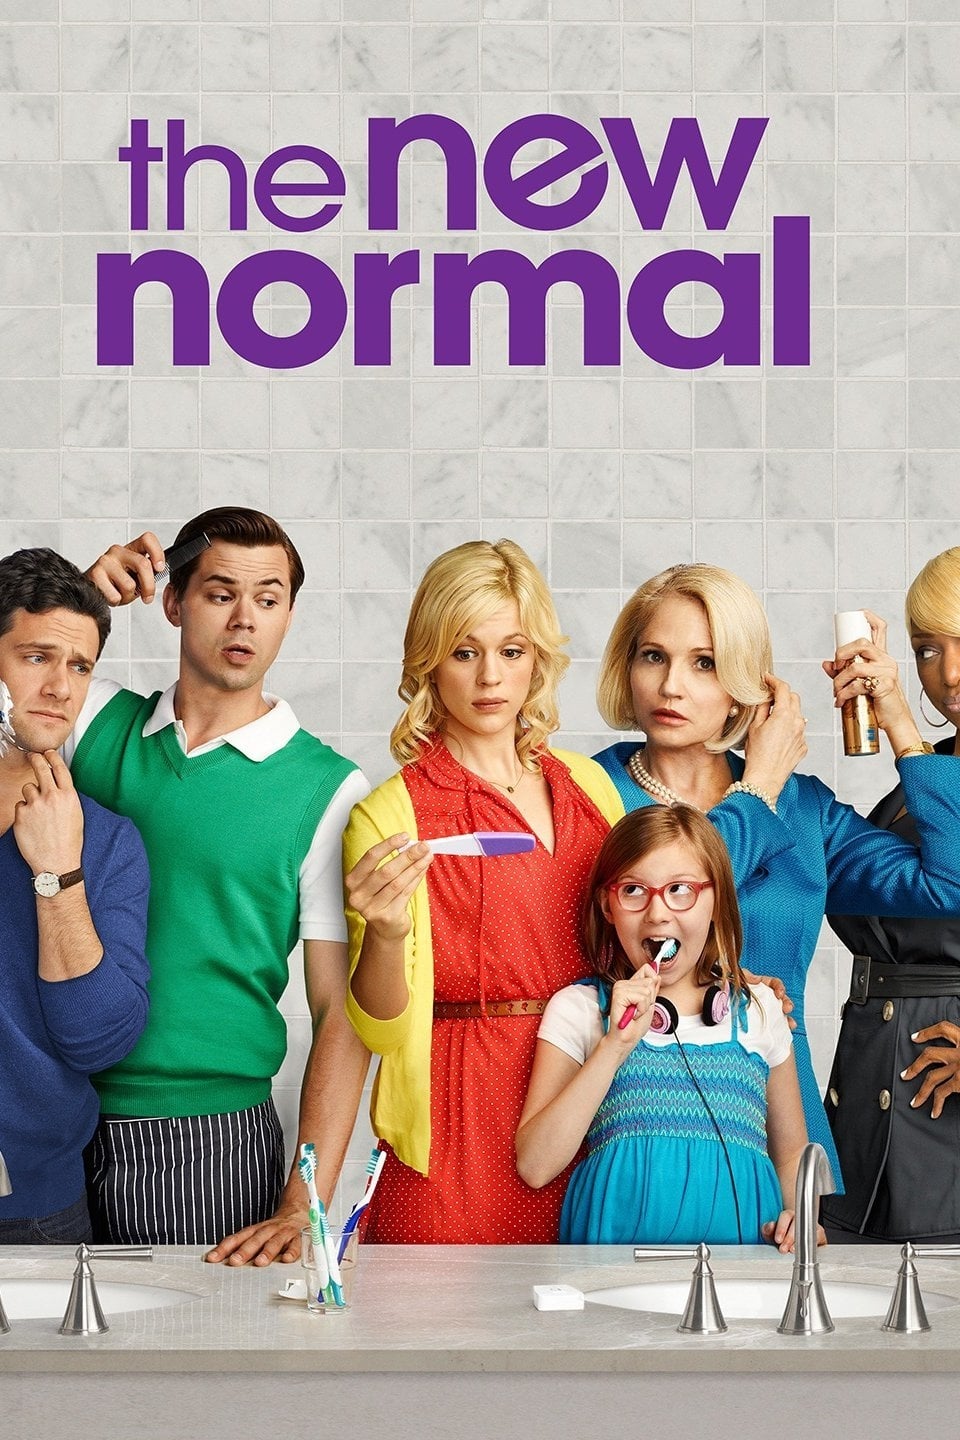 The New Normal (2012)